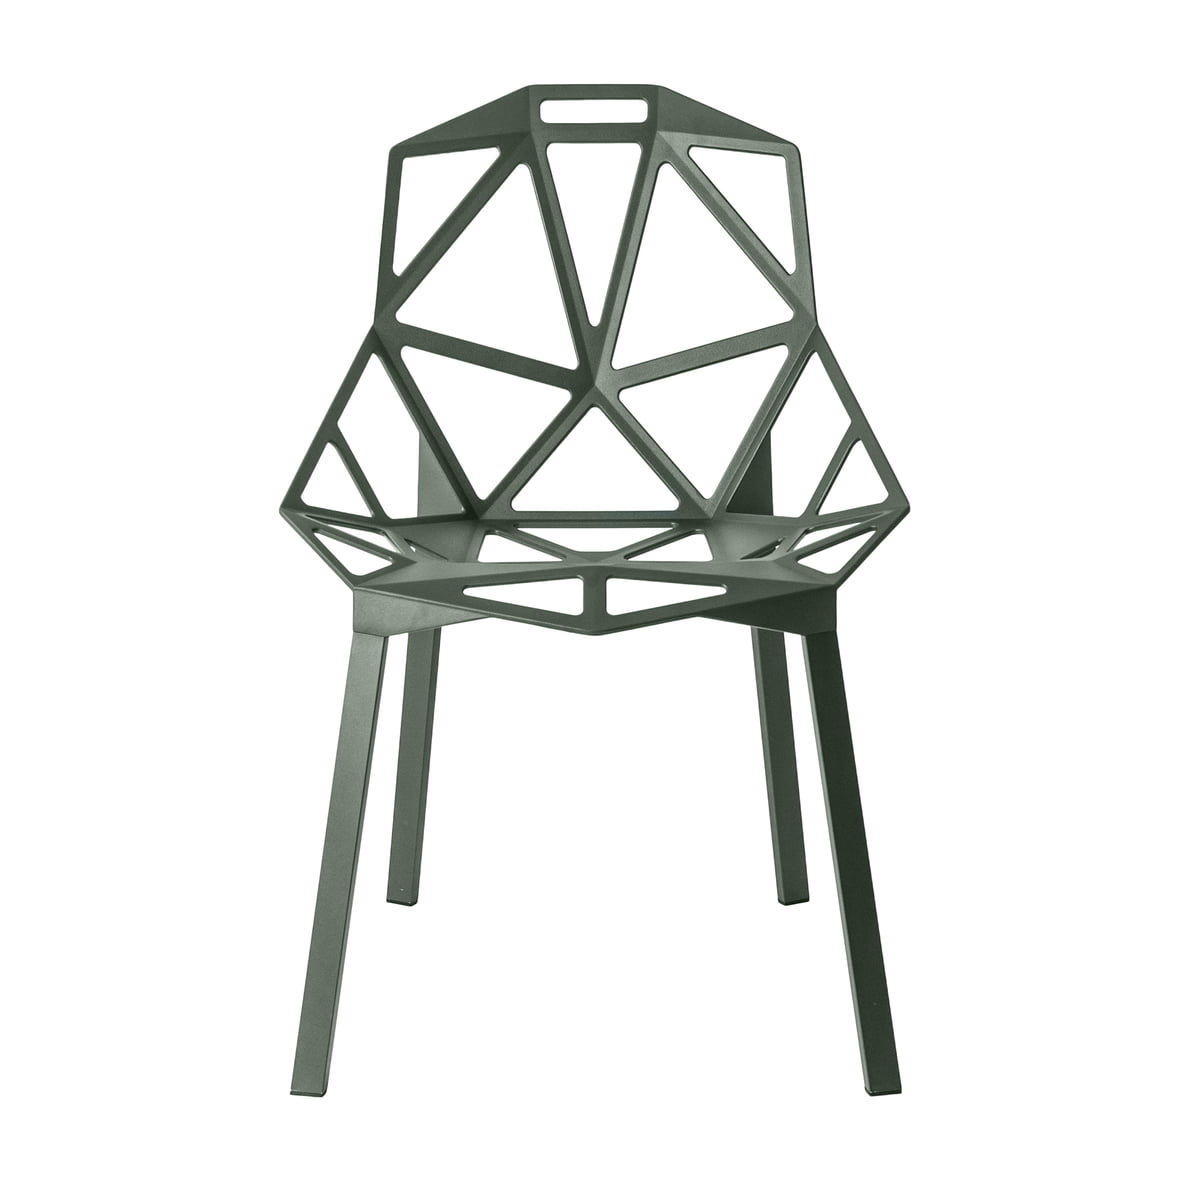 Magis Konstantin Grcic Chair One Stacking Chair